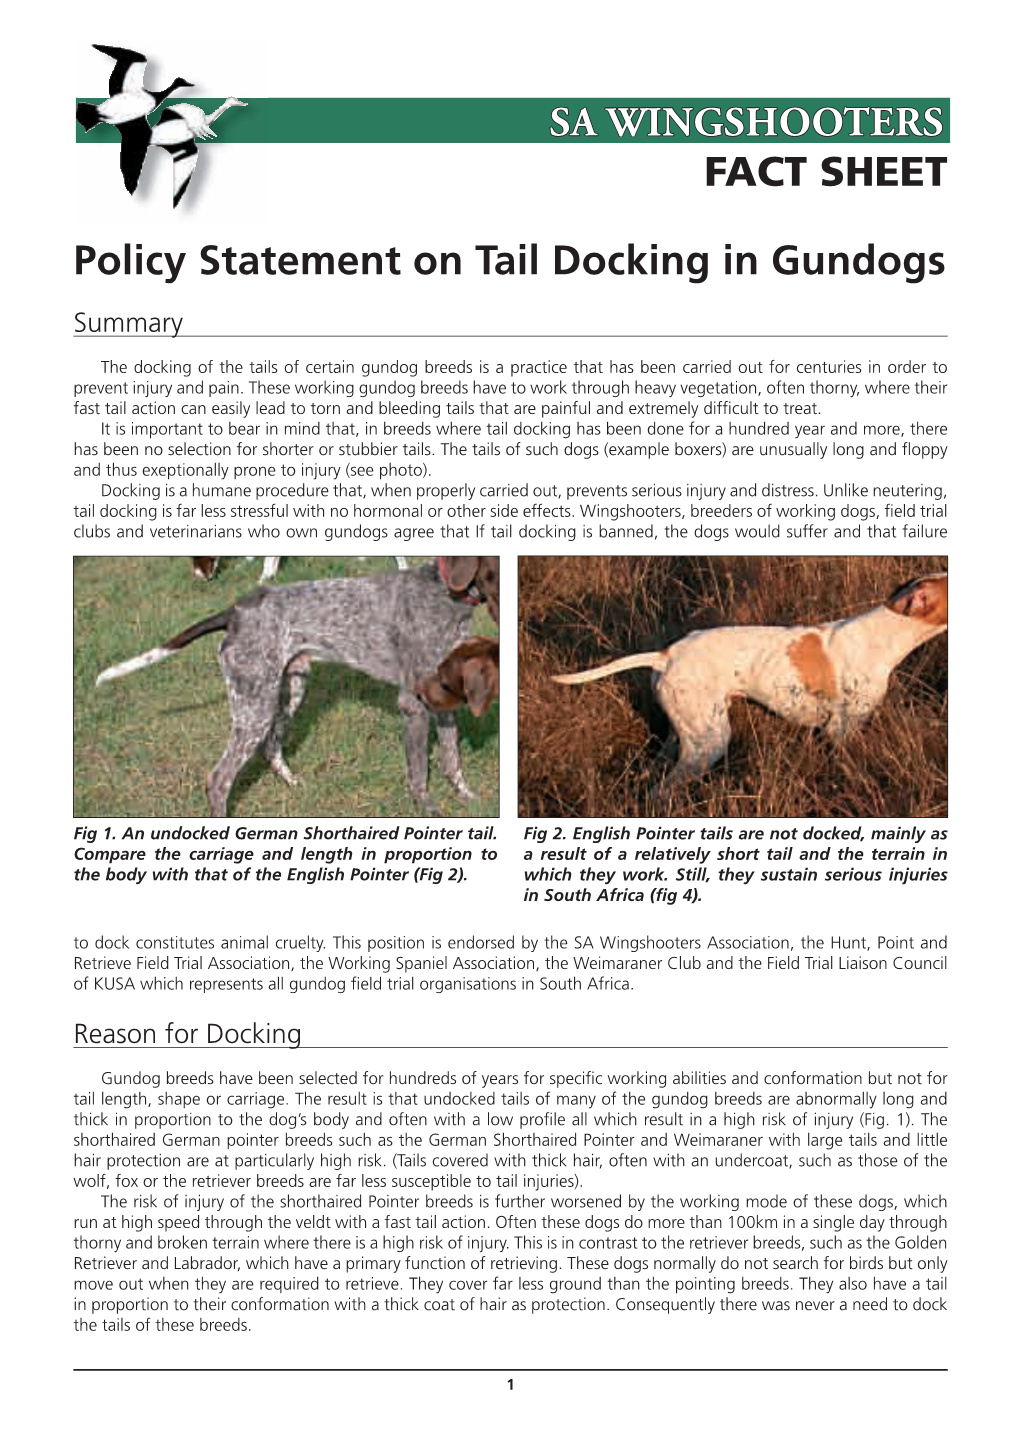 SA WINGSHOOTERS FACT SHEET Policy Statement on Tail Docking In